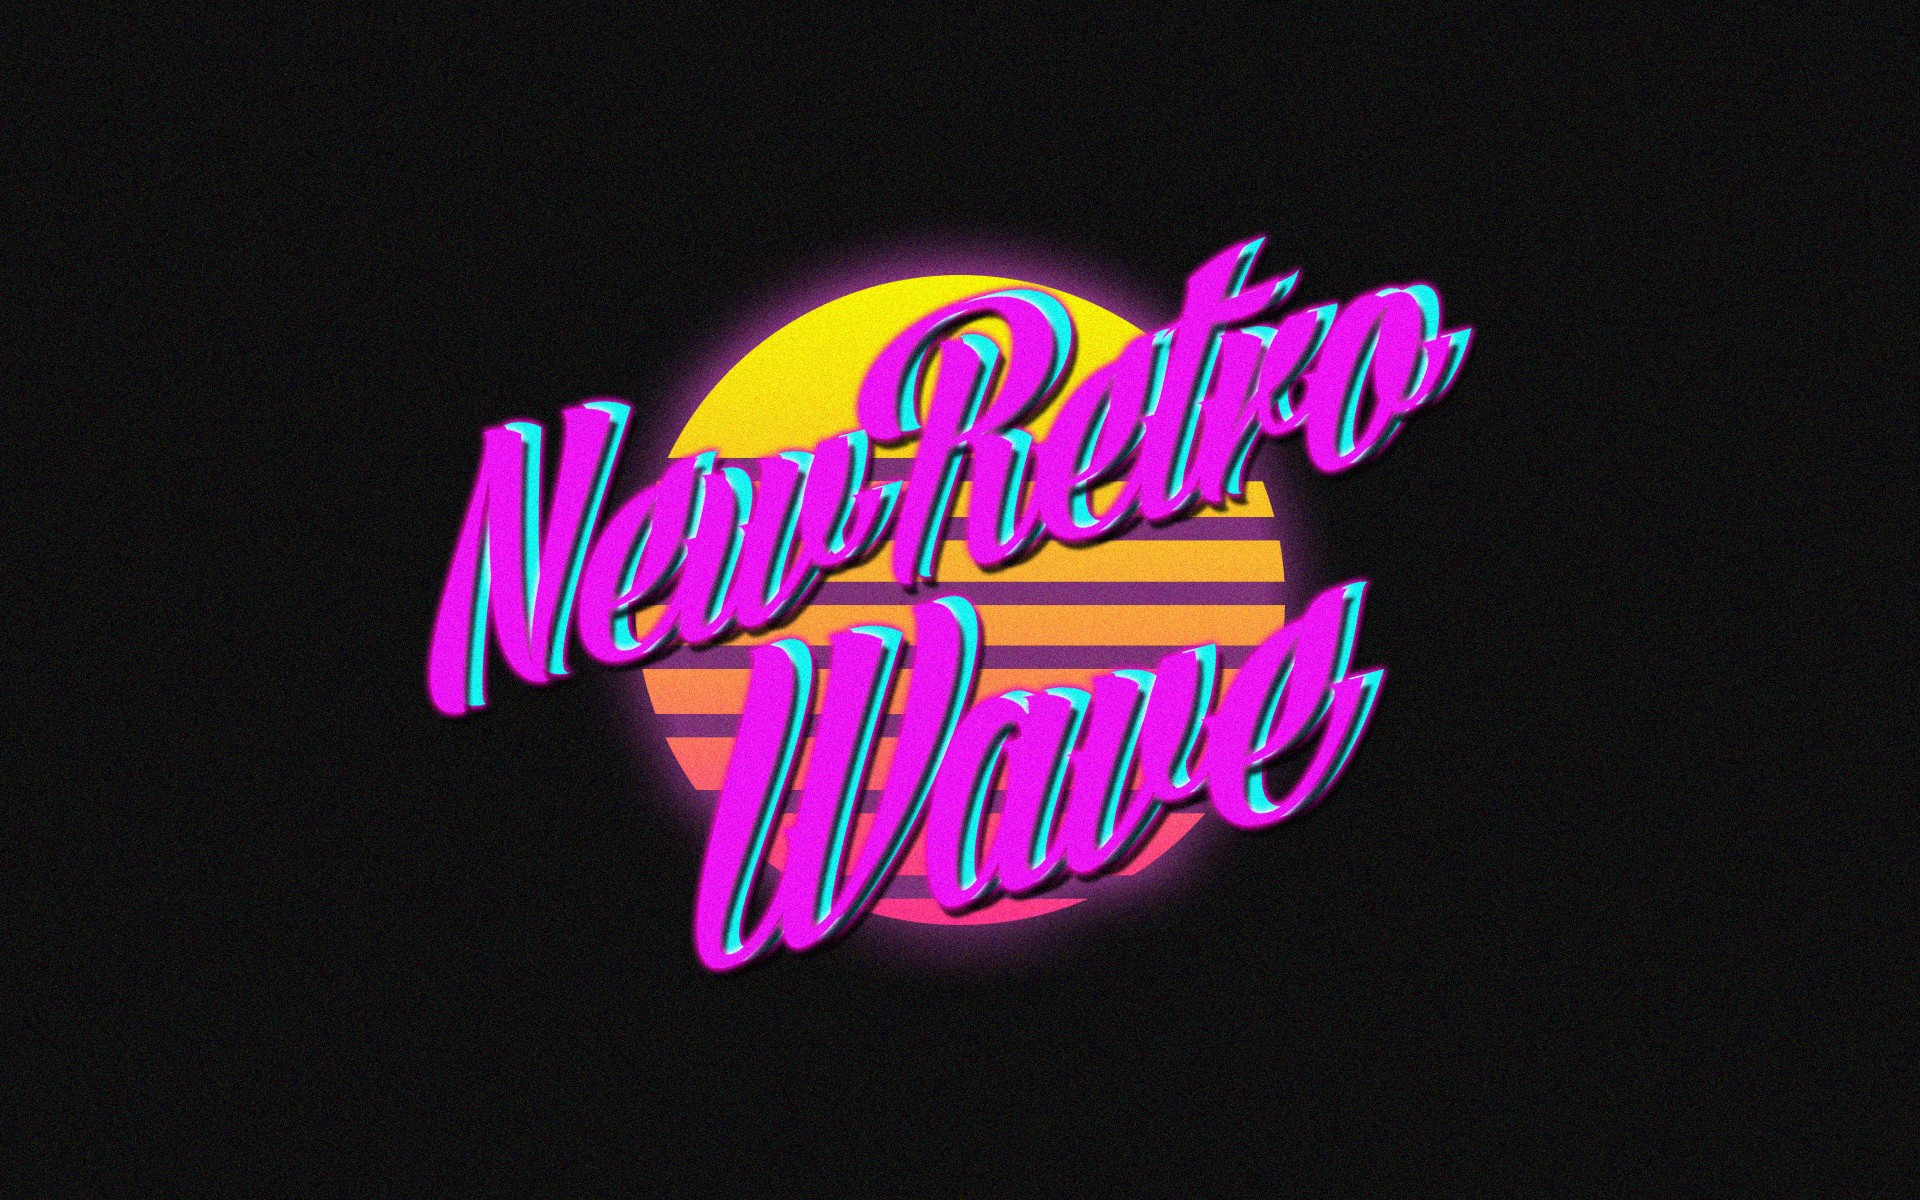 General 1920x1200 New Retro Wave neon 1980s vintage retro games synthwave black background simple background